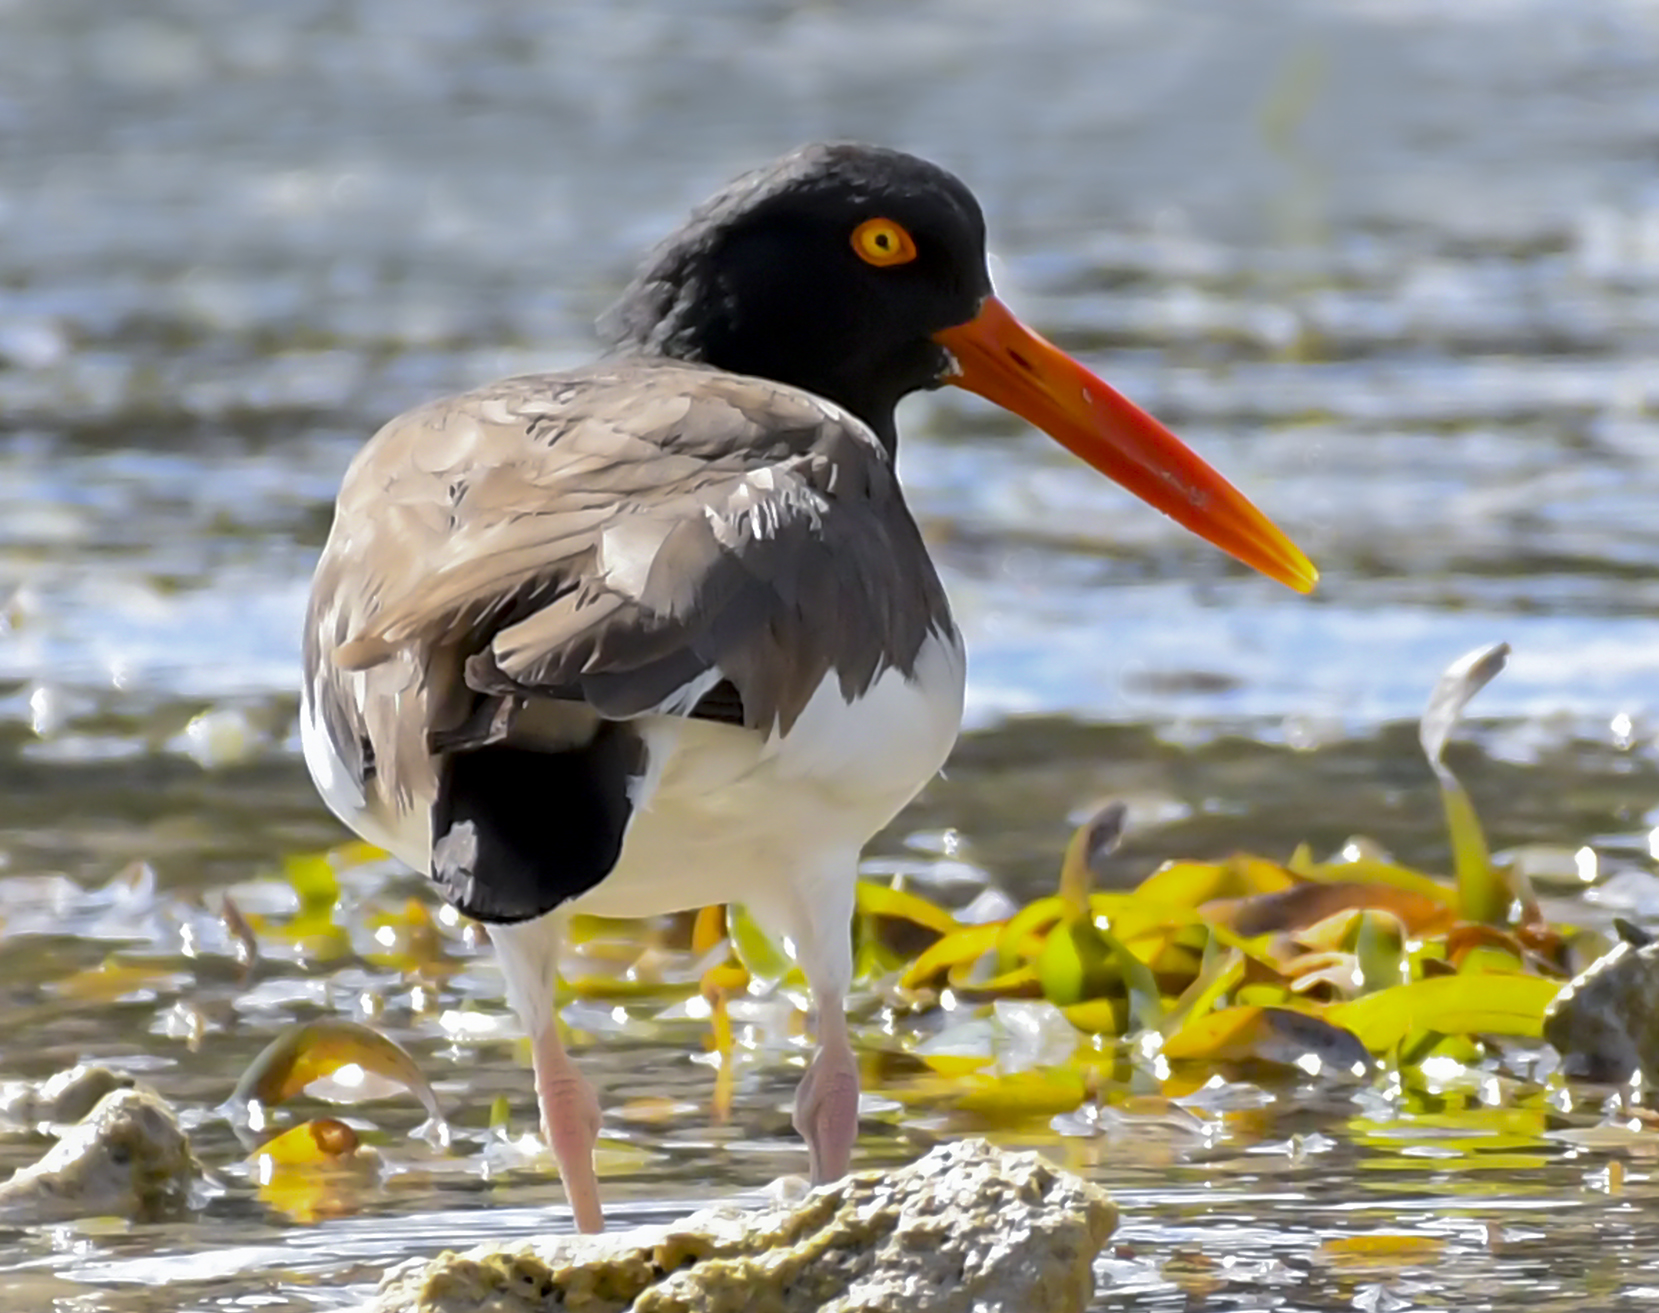 The oystercatchers have color-coordinated eyes and bills. (Photo by Gail Karlsson)